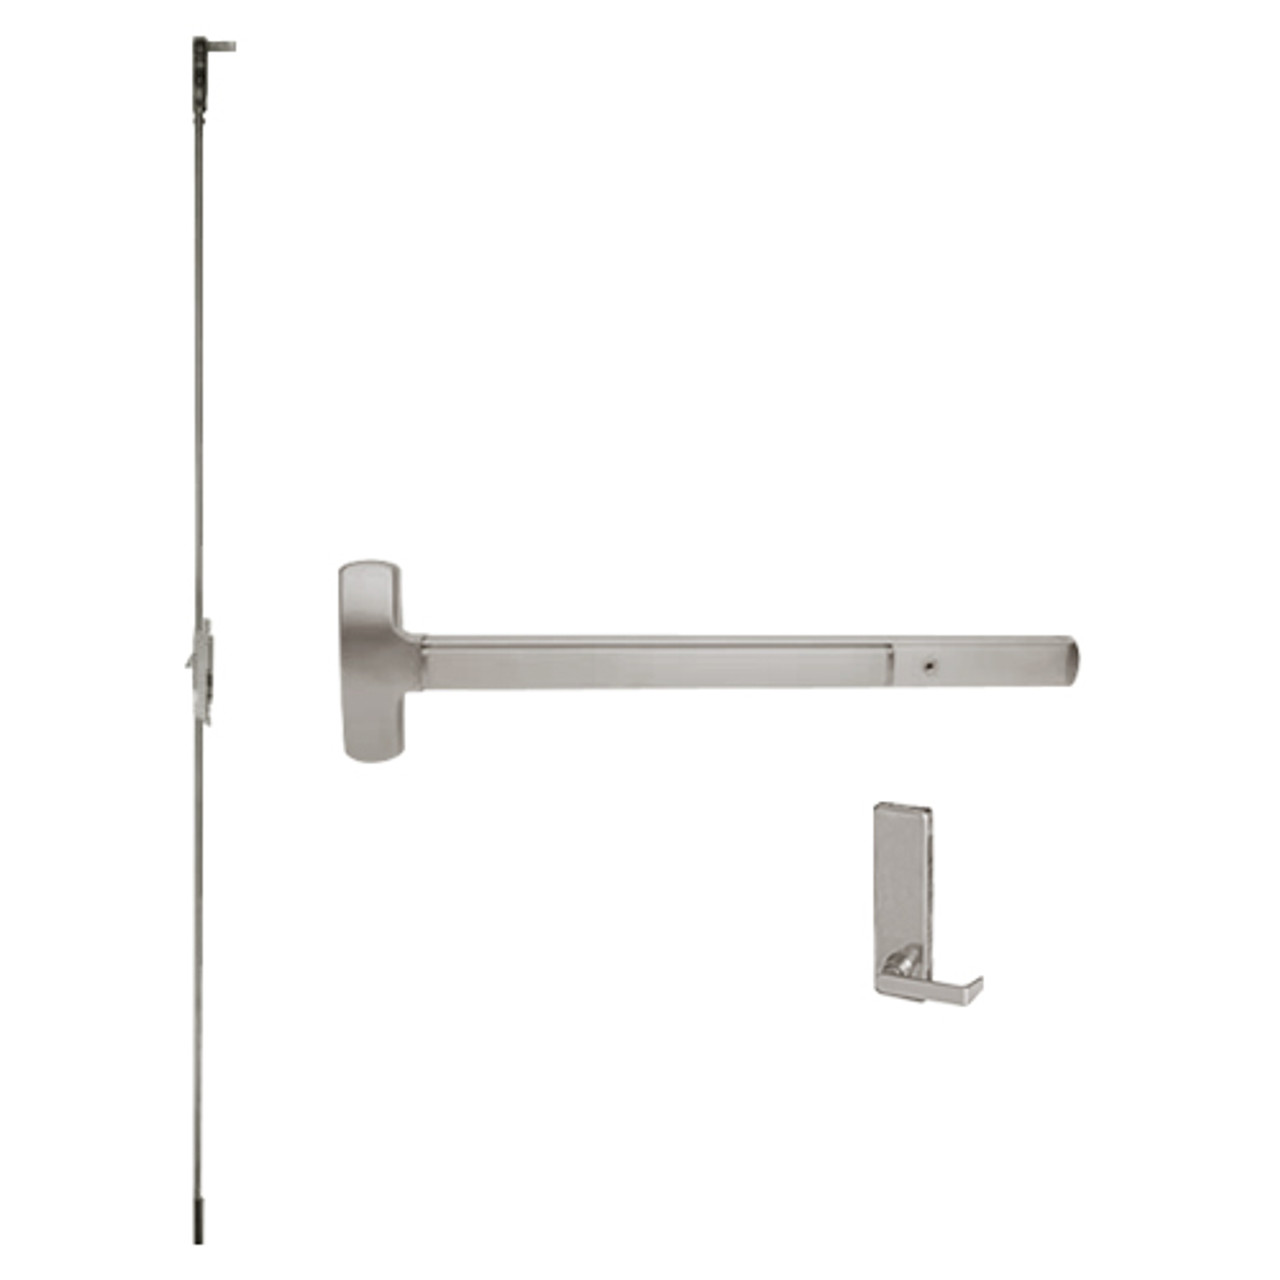 25-C-L-DT-DANE-US32D-3-LHR Falcon Exit Device in Satin Stainless Steel